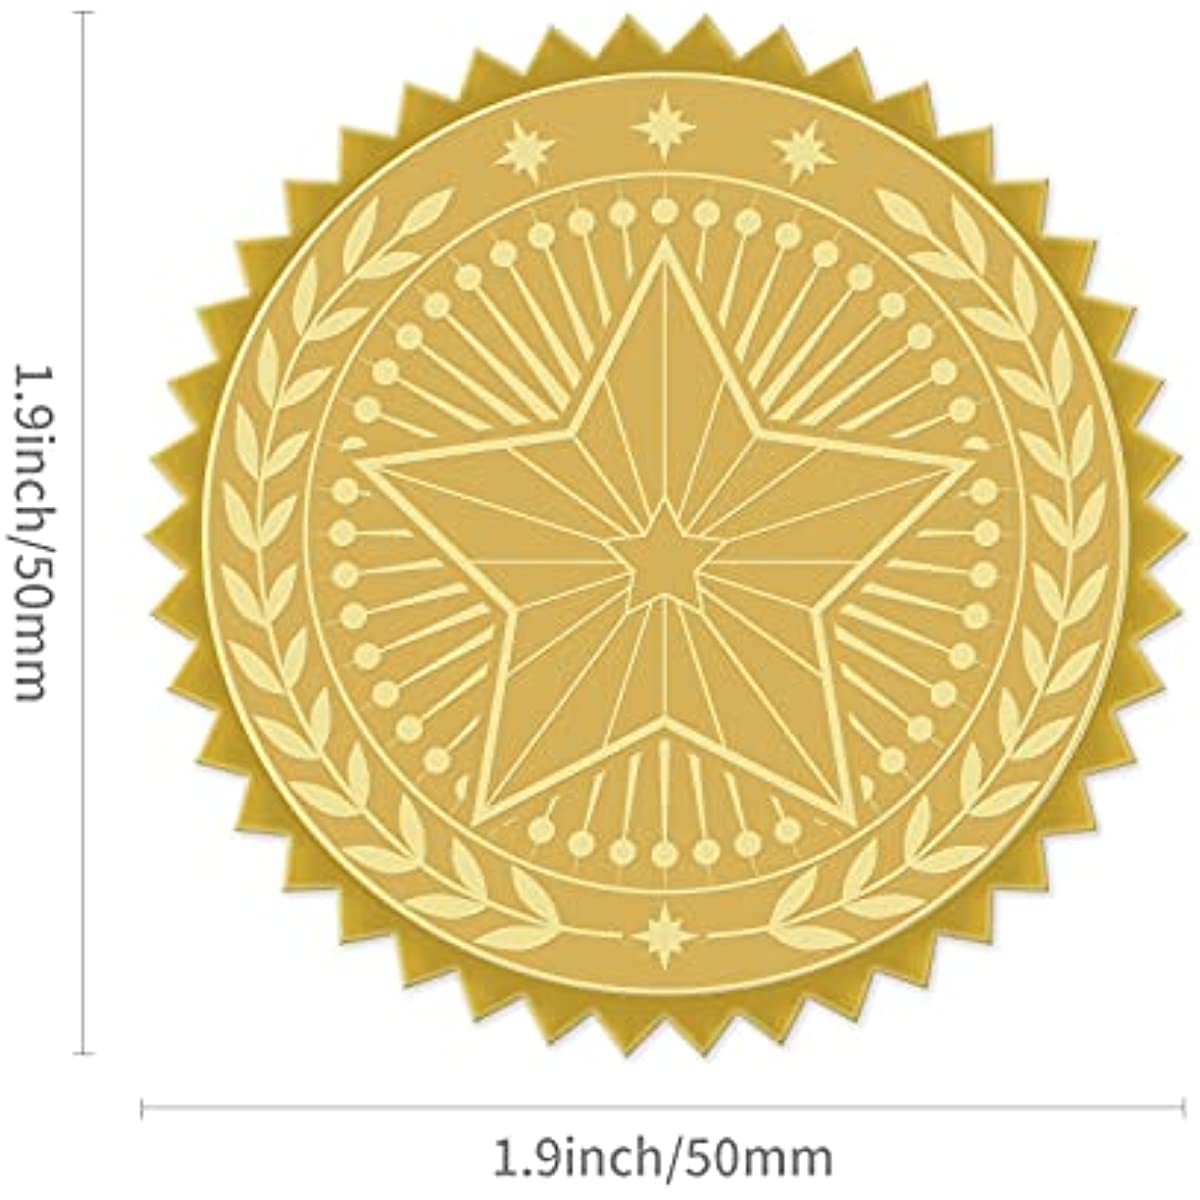 100pcs Embossed Foil Stickers Five-Pointed Star Pattern Gold Foil  Certificate Seals Self Adhesive Embossed Seals Decoration Labels for  Certificates Awards Graduation Invitations Diplomas 